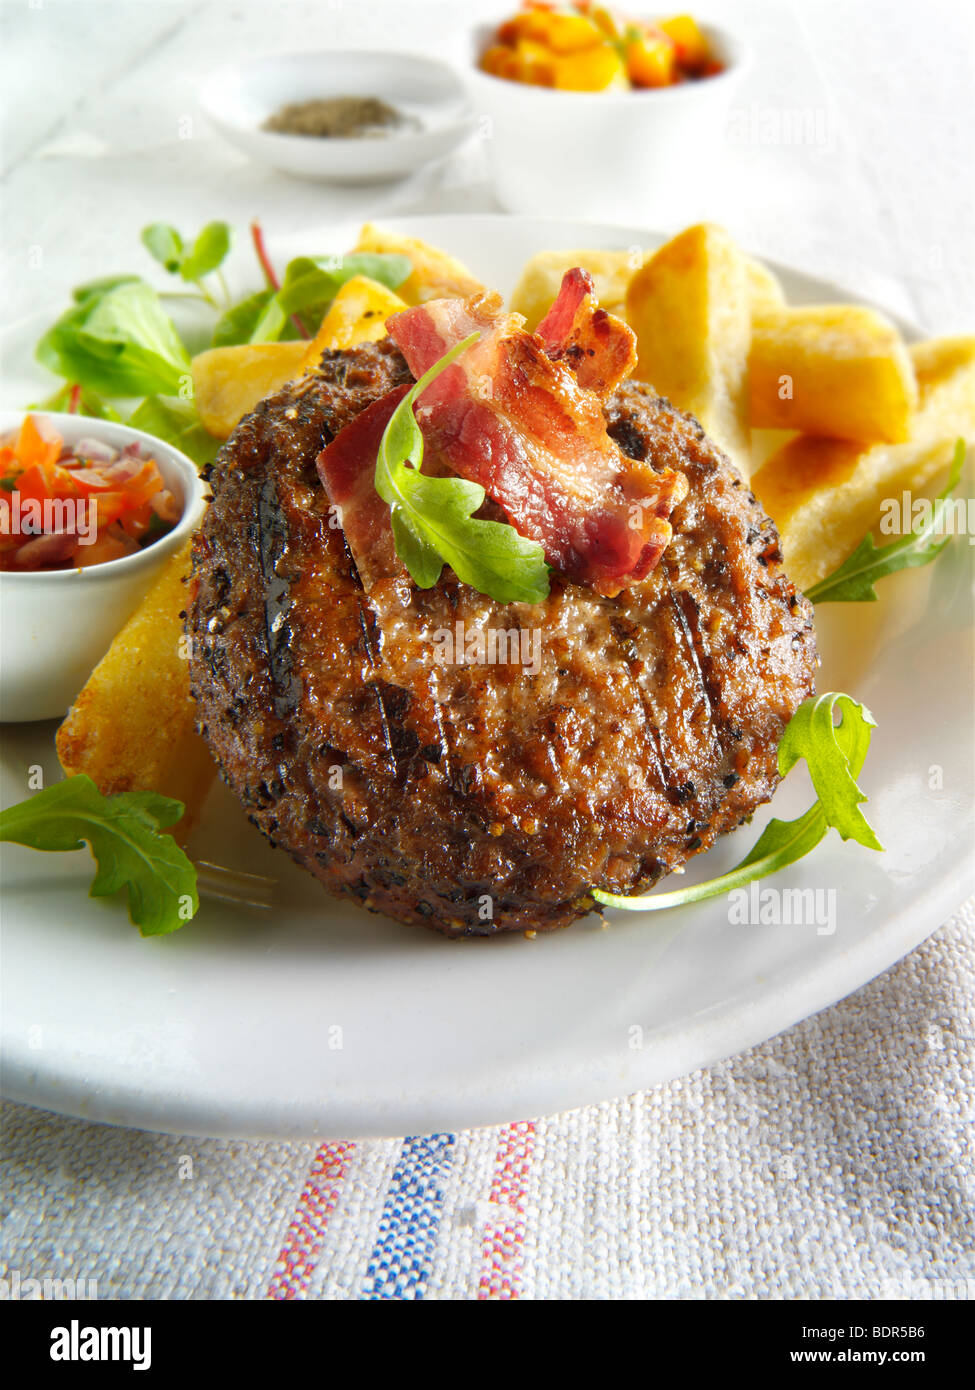 Char grilled beef burger with chunky chips and salad Stock Photo